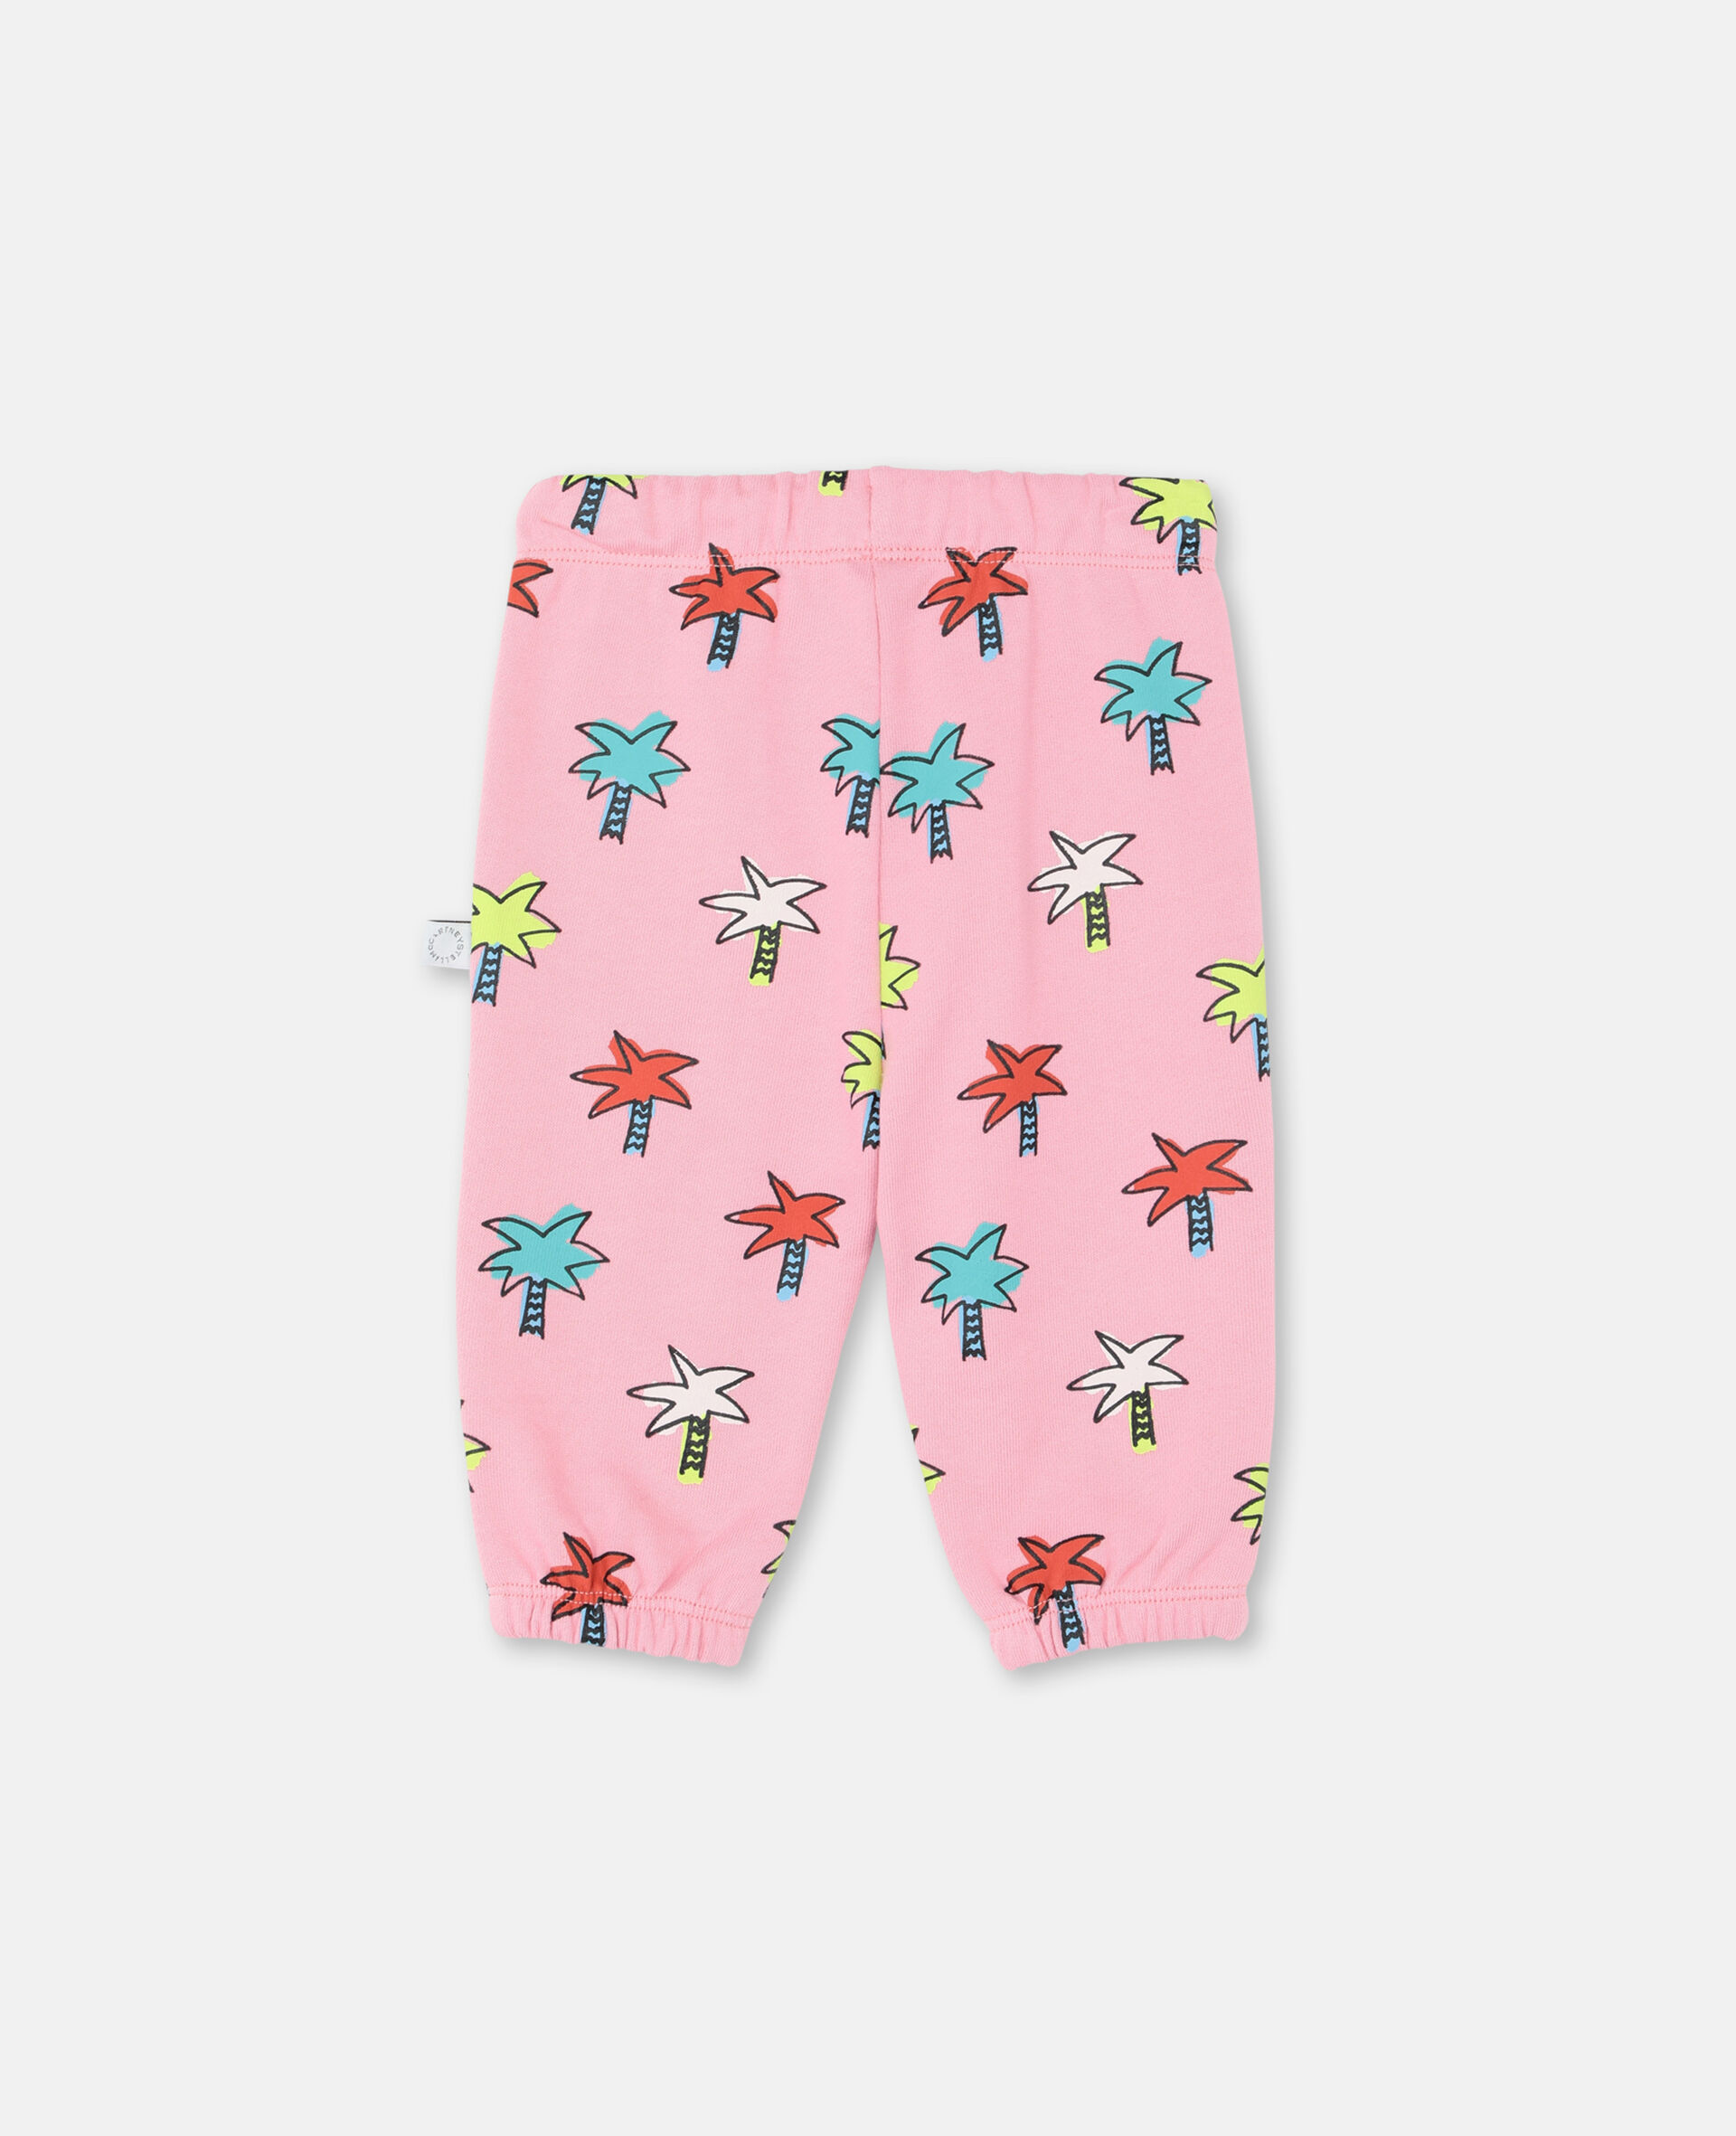 Doodly Palms Cotton Sweatpants -Pink-large image number 3